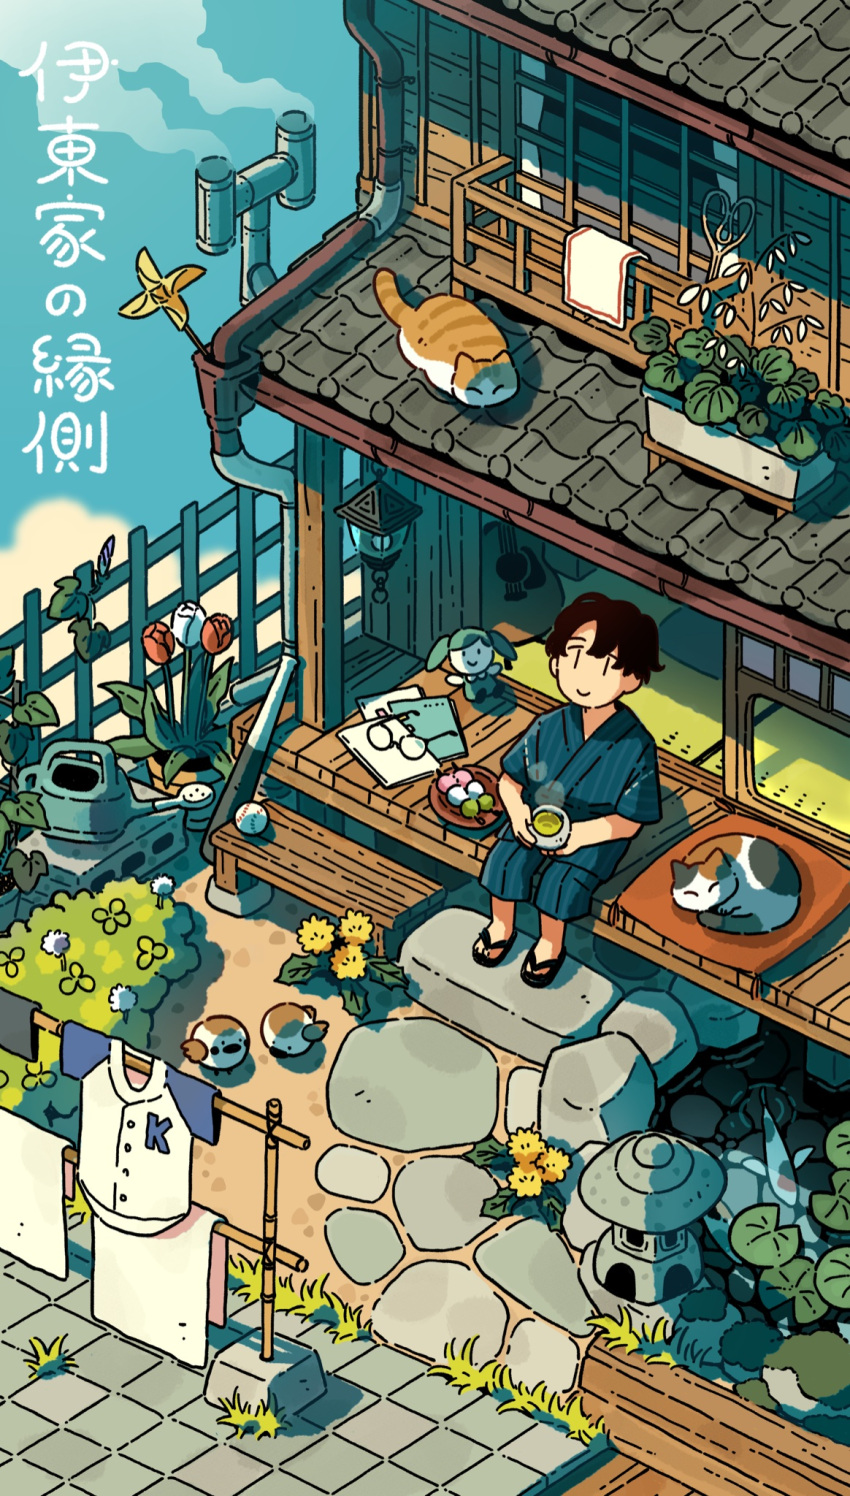 1boy animal ball baseball_bat bench bird black_hair brown_cat bush calico canalbooks1125 cat chimney cinder_block closed_mouth commentary_request cup cushion dandelion_clock dango day doll drainpipe fence flower food from_above glasses green_tea guitar highres holding holding_cup instrument itou_kent koi laundry laundry_pole lily_pad looking_up male_focus notebook outdoors pillar pinwheel plant plate pond potted_plant real_life red_flower red_tulip ripples rock rug_beater sanshoku_dango short_hair short_sleeves sitting sleeping_animal smile solo steam stepping_stones stone_lantern tatami tea towel translation_request trellis tulip unworn_eyewear veranda wagashi watering_can white_flower white_tulip wide_shot wooden_bench yellow_flower zabuton zouri |_|